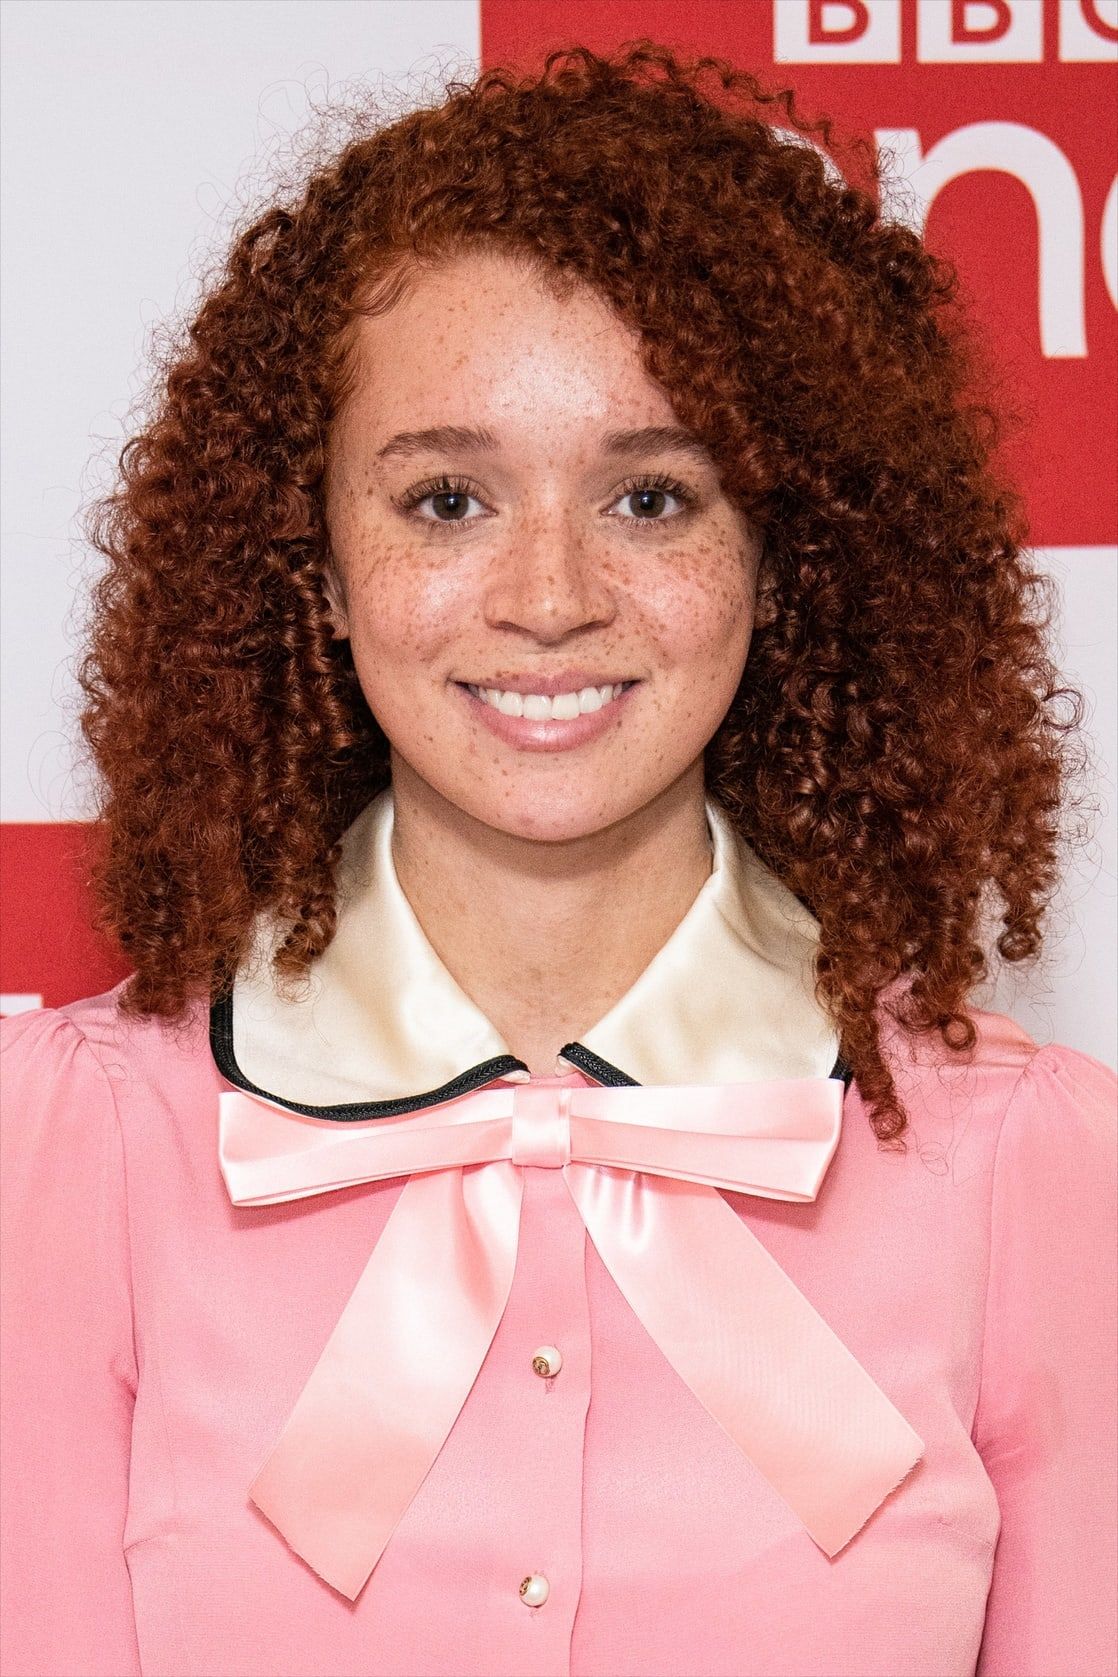 Picture of Erin Kellyman.